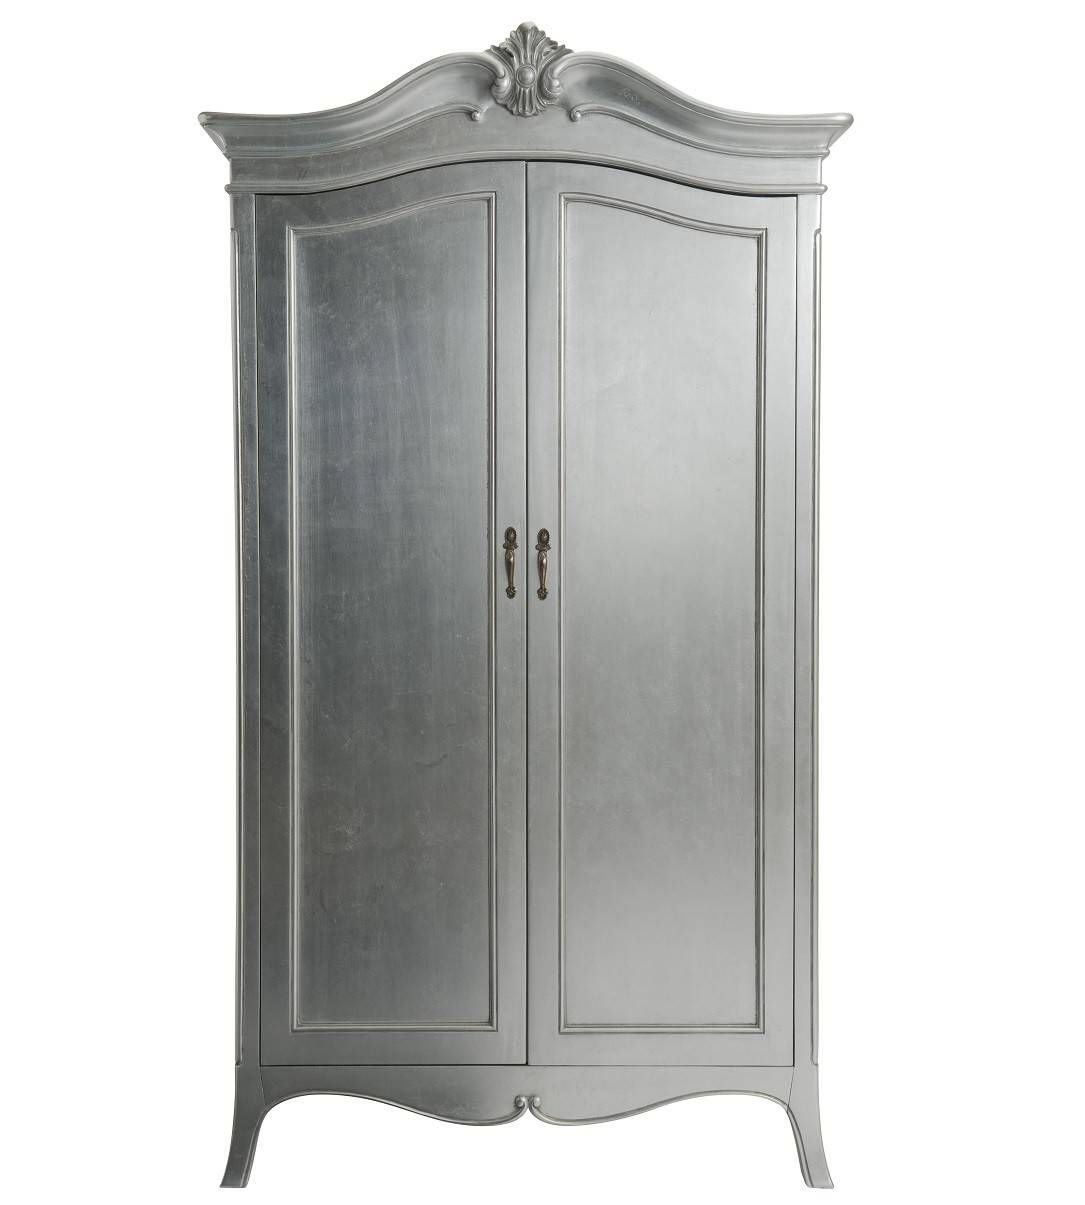 Louis French Silver Leaf 2 Door Double Wardrobe | Oak Furniture Uk For Silver French Wardrobes (View 8 of 15)